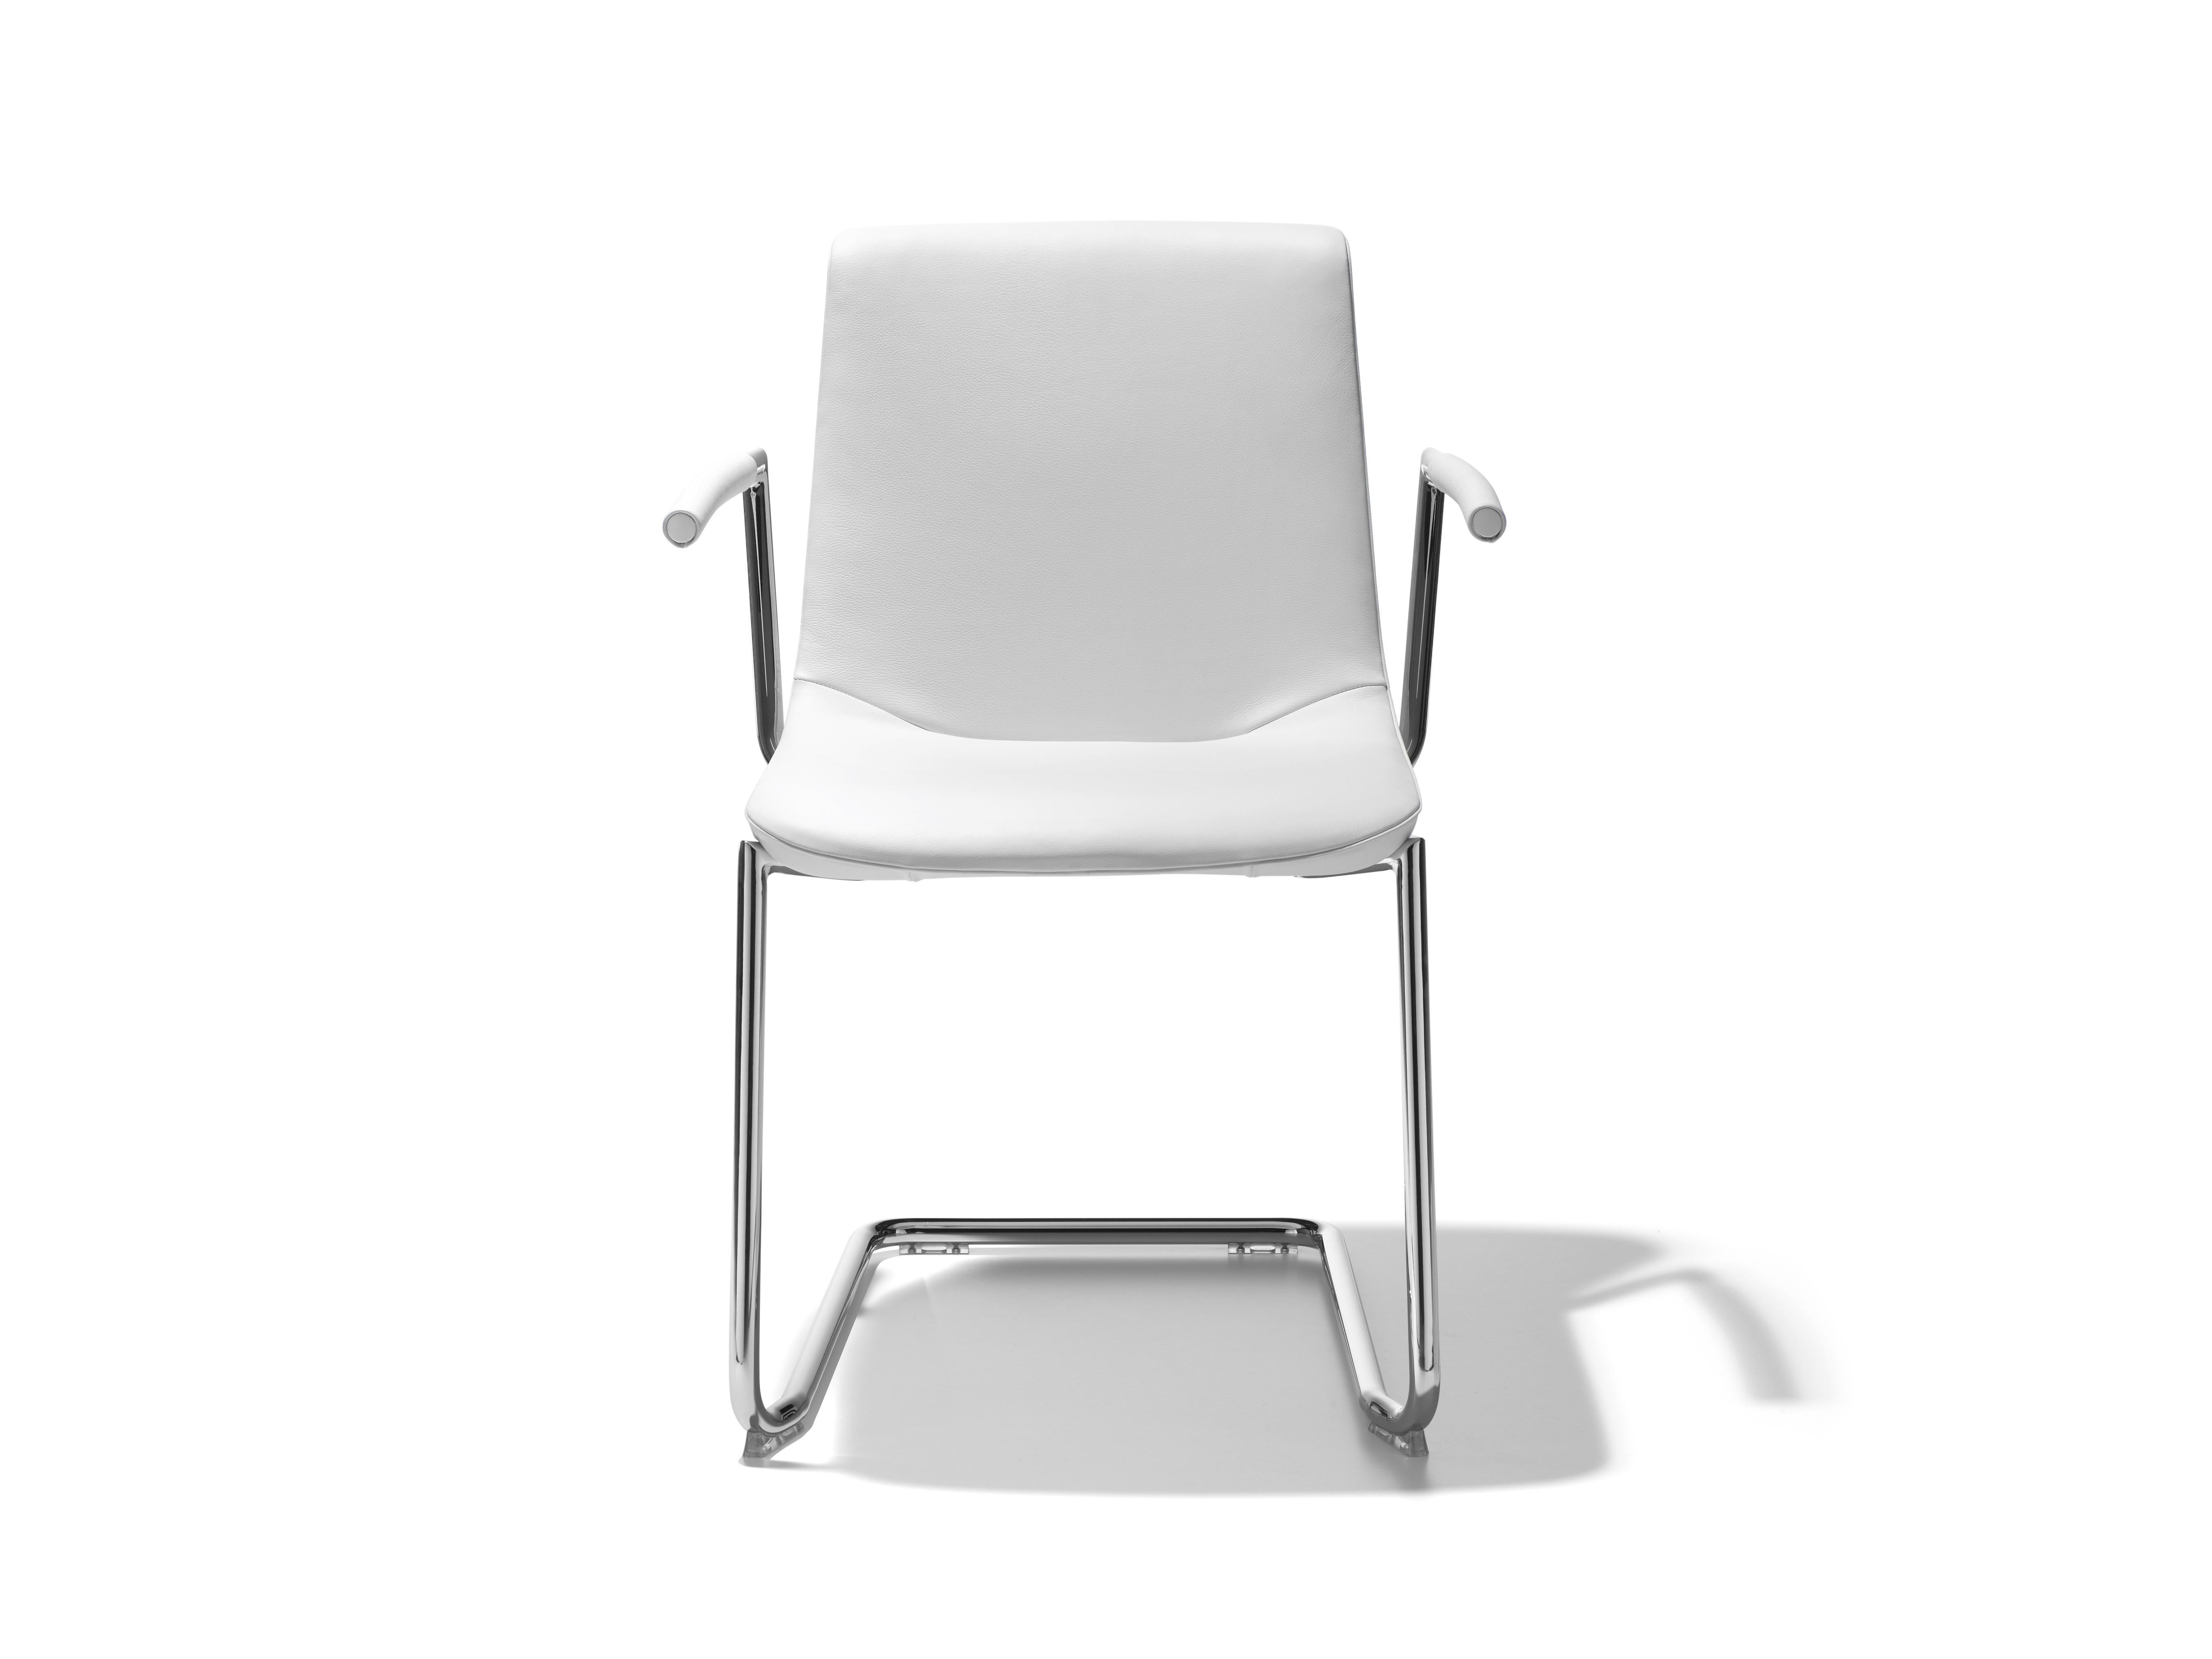 DS-718 chair by De Sede
Dimensions: D 60 x W 61 x H 84 cm
Materials: chrome-plated, polyurethane shell with moulded foam seat, leather. 

Prices may change according to the chosen materials and size. 

A matchless union of clear design,